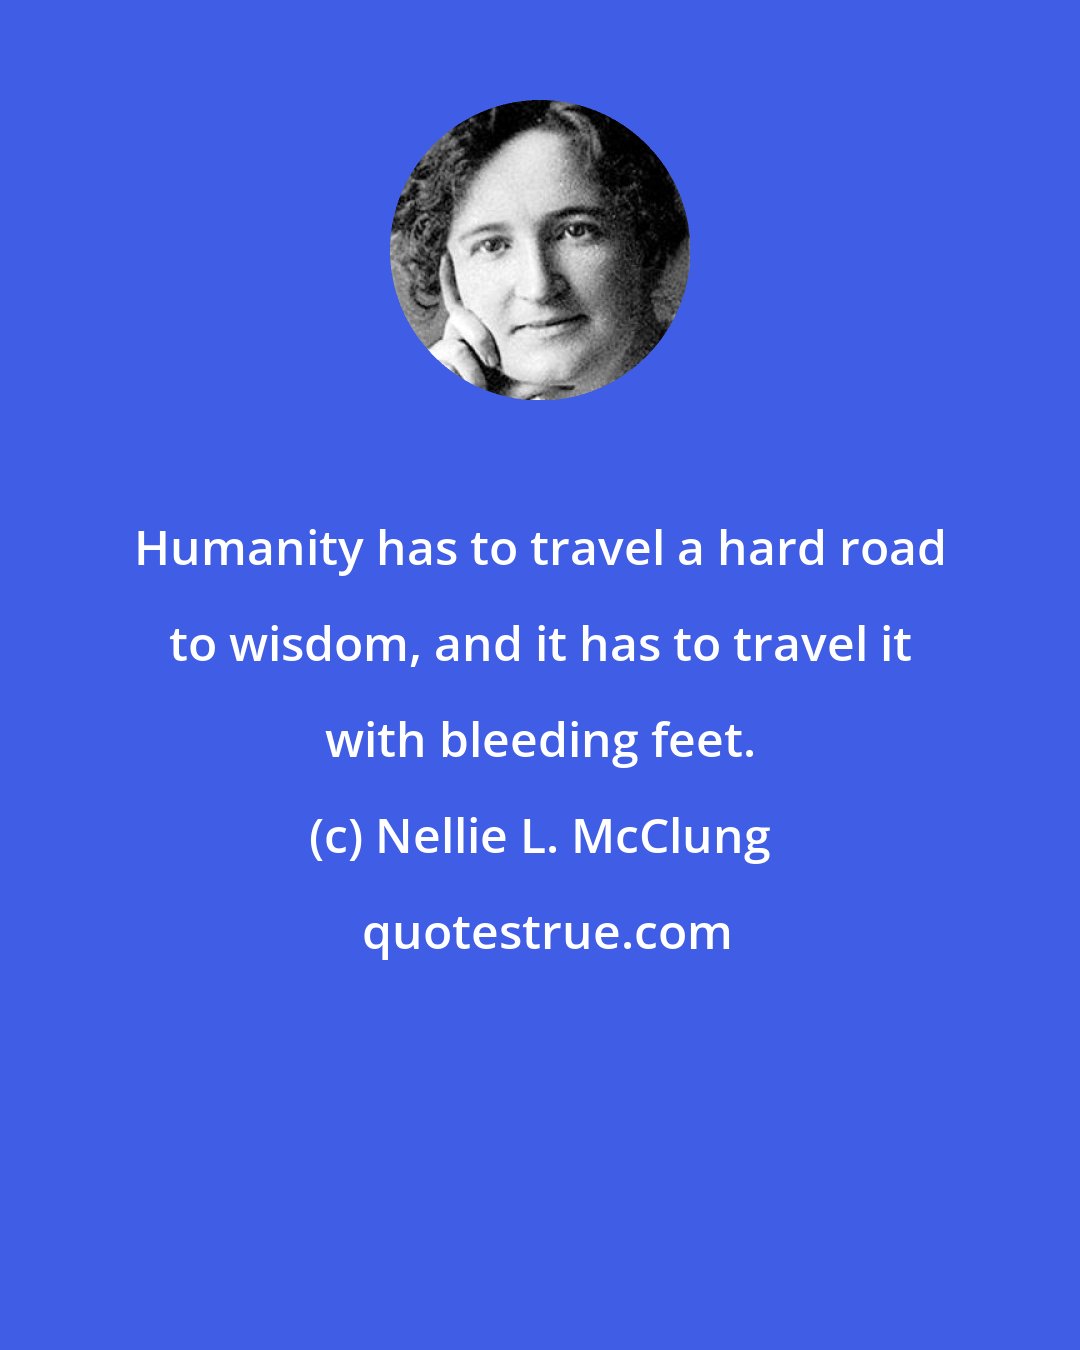 Nellie L. McClung: Humanity has to travel a hard road to wisdom, and it has to travel it with bleeding feet.